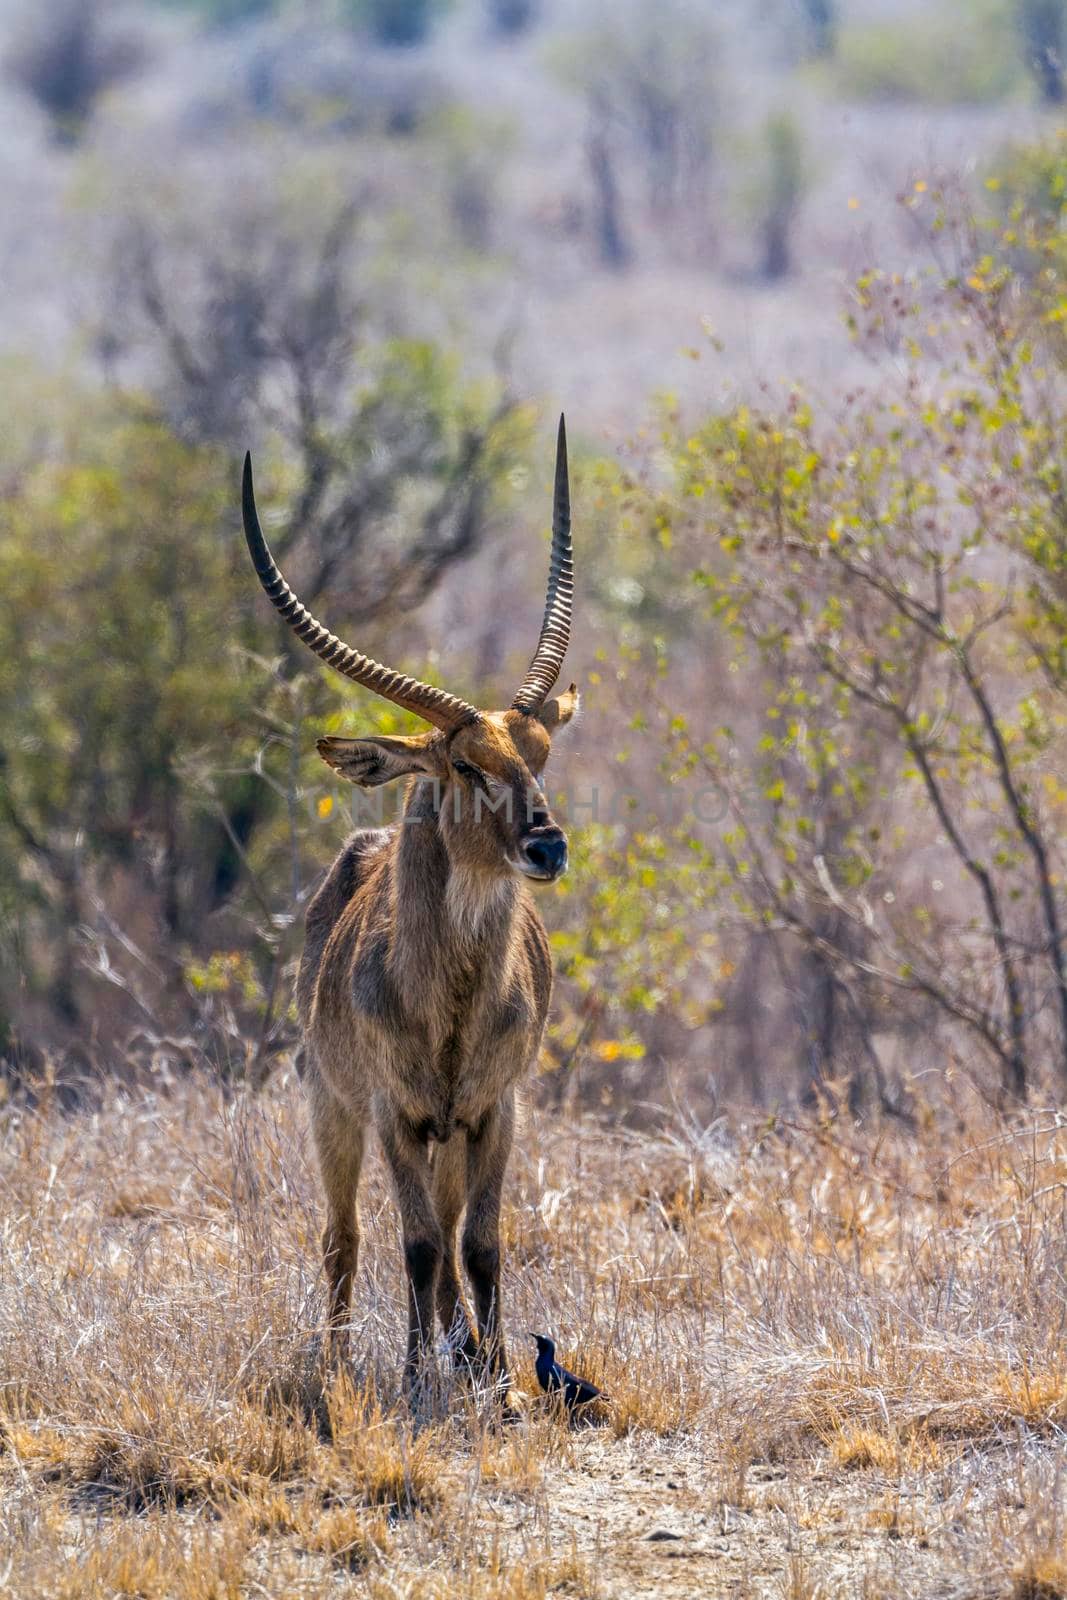 Common Waterbuck in Kruger National park, South Africa by PACOCOMO